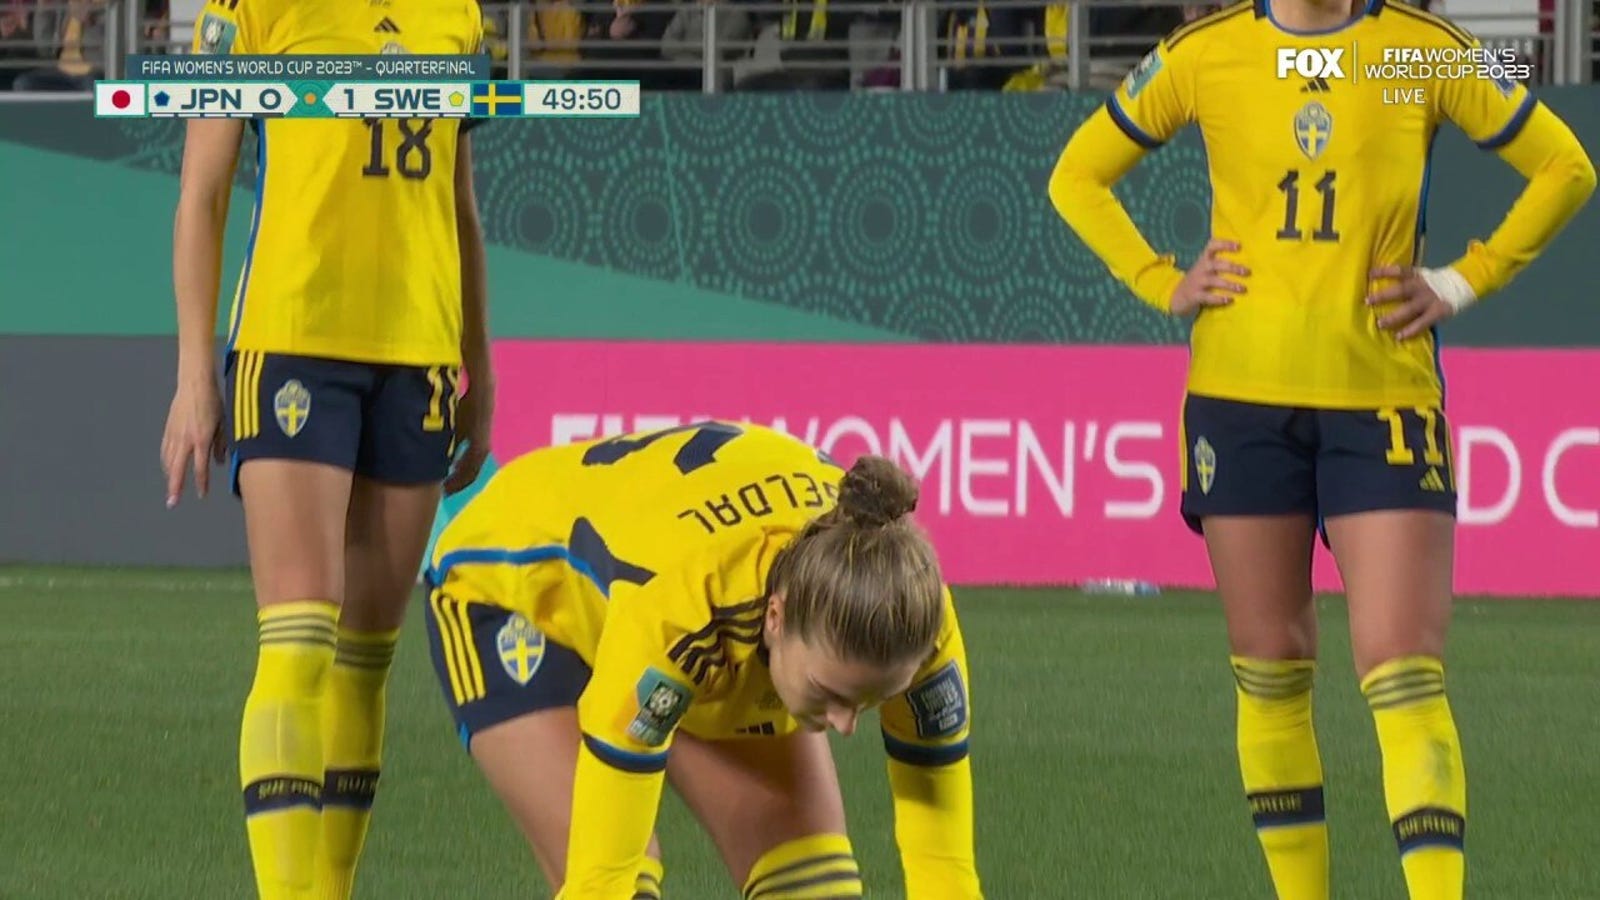 Sweden's Philippa Engeldahl scores a goal against Japan in the 51st minute